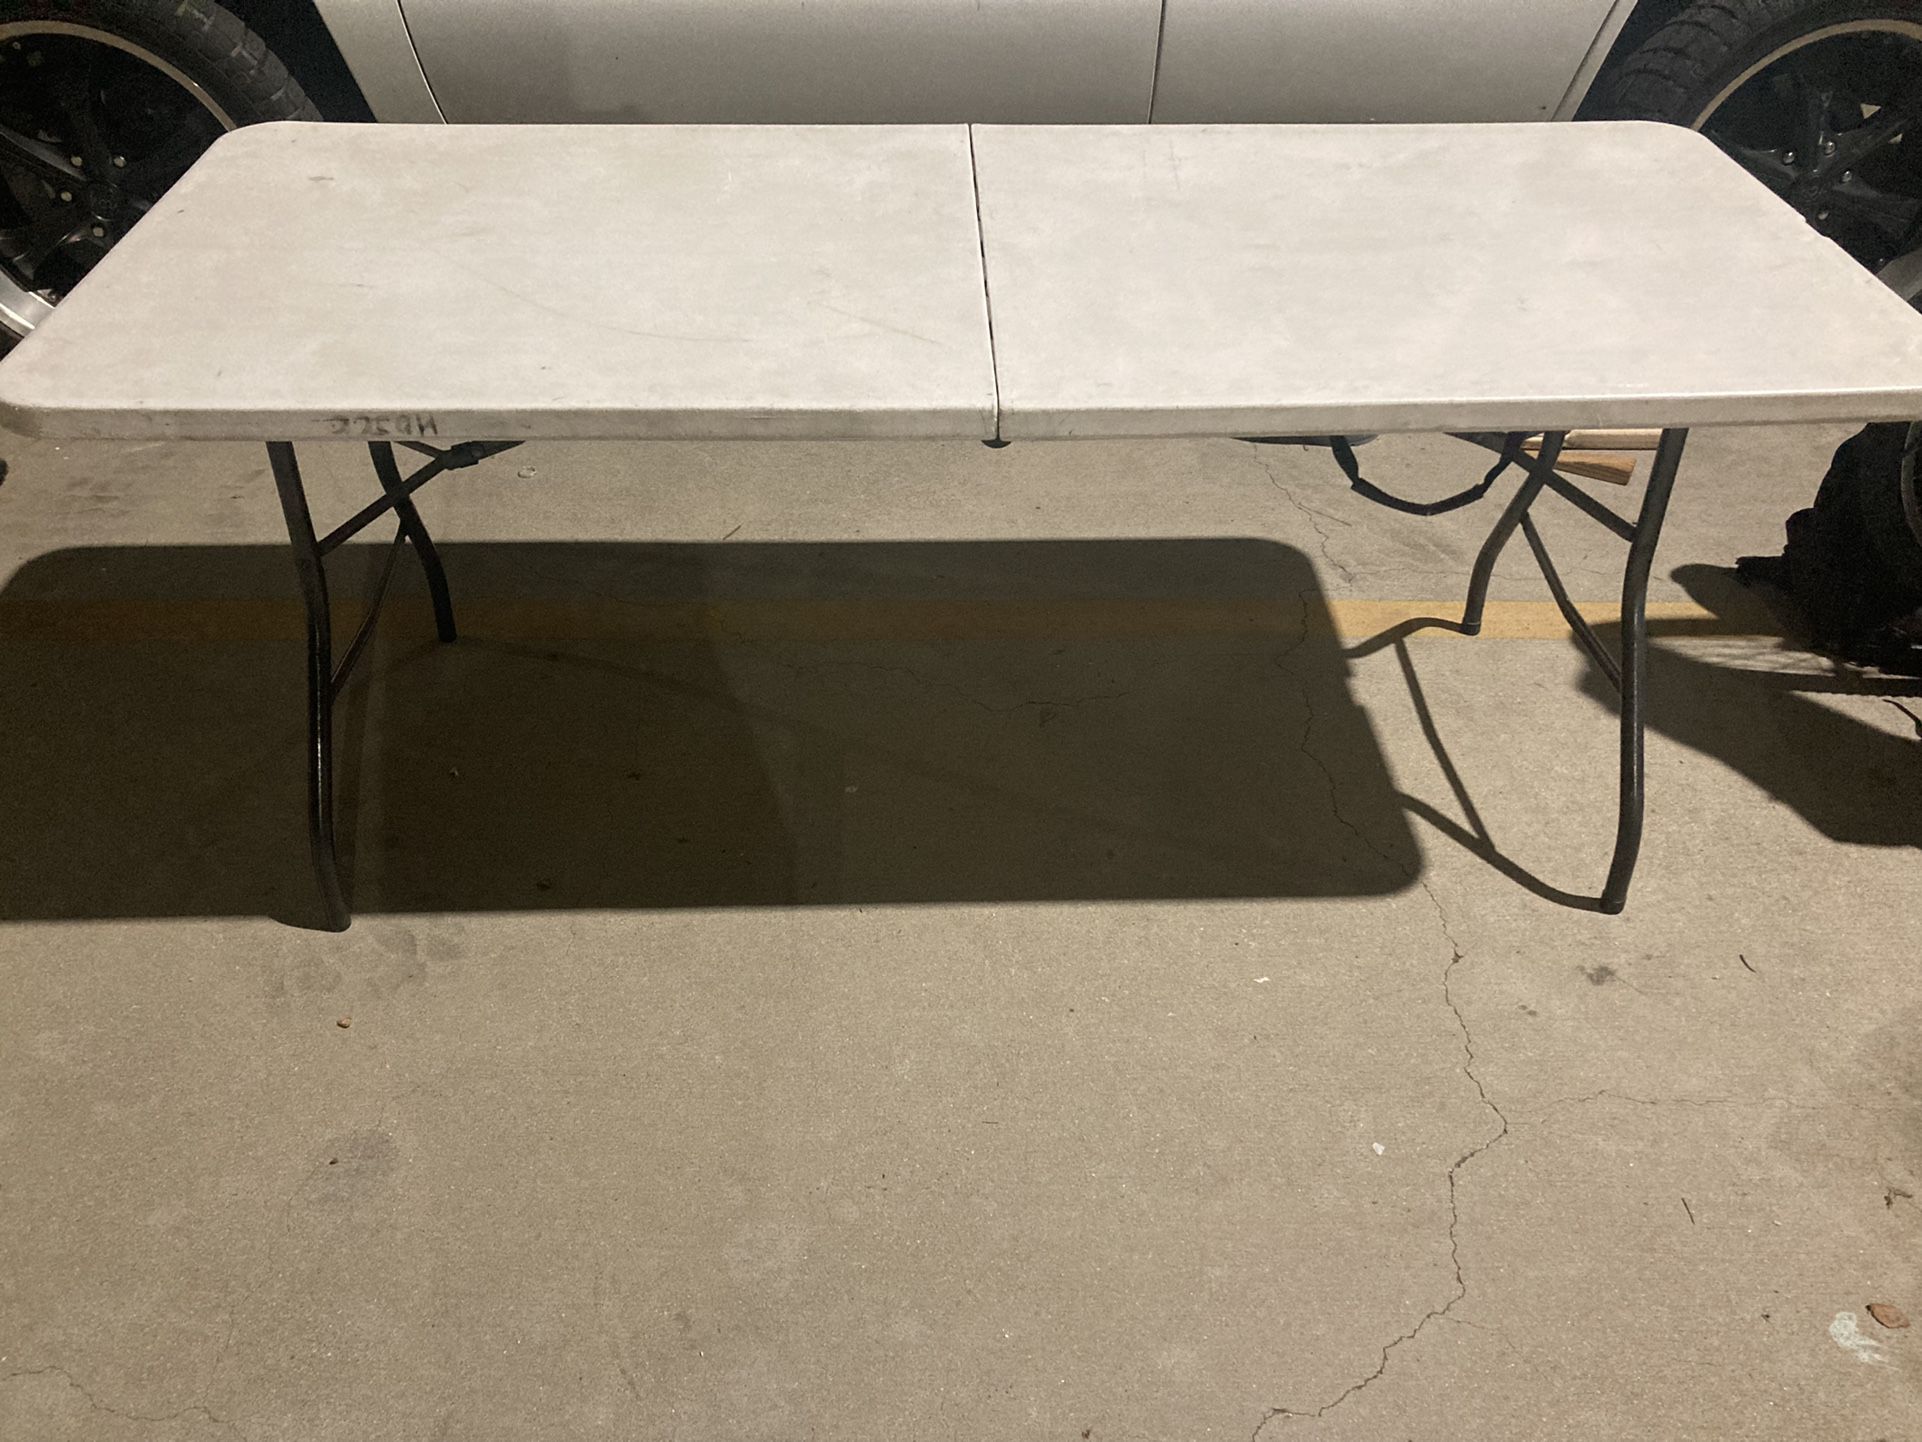 6 Foot Plastic Folding Table With Handle